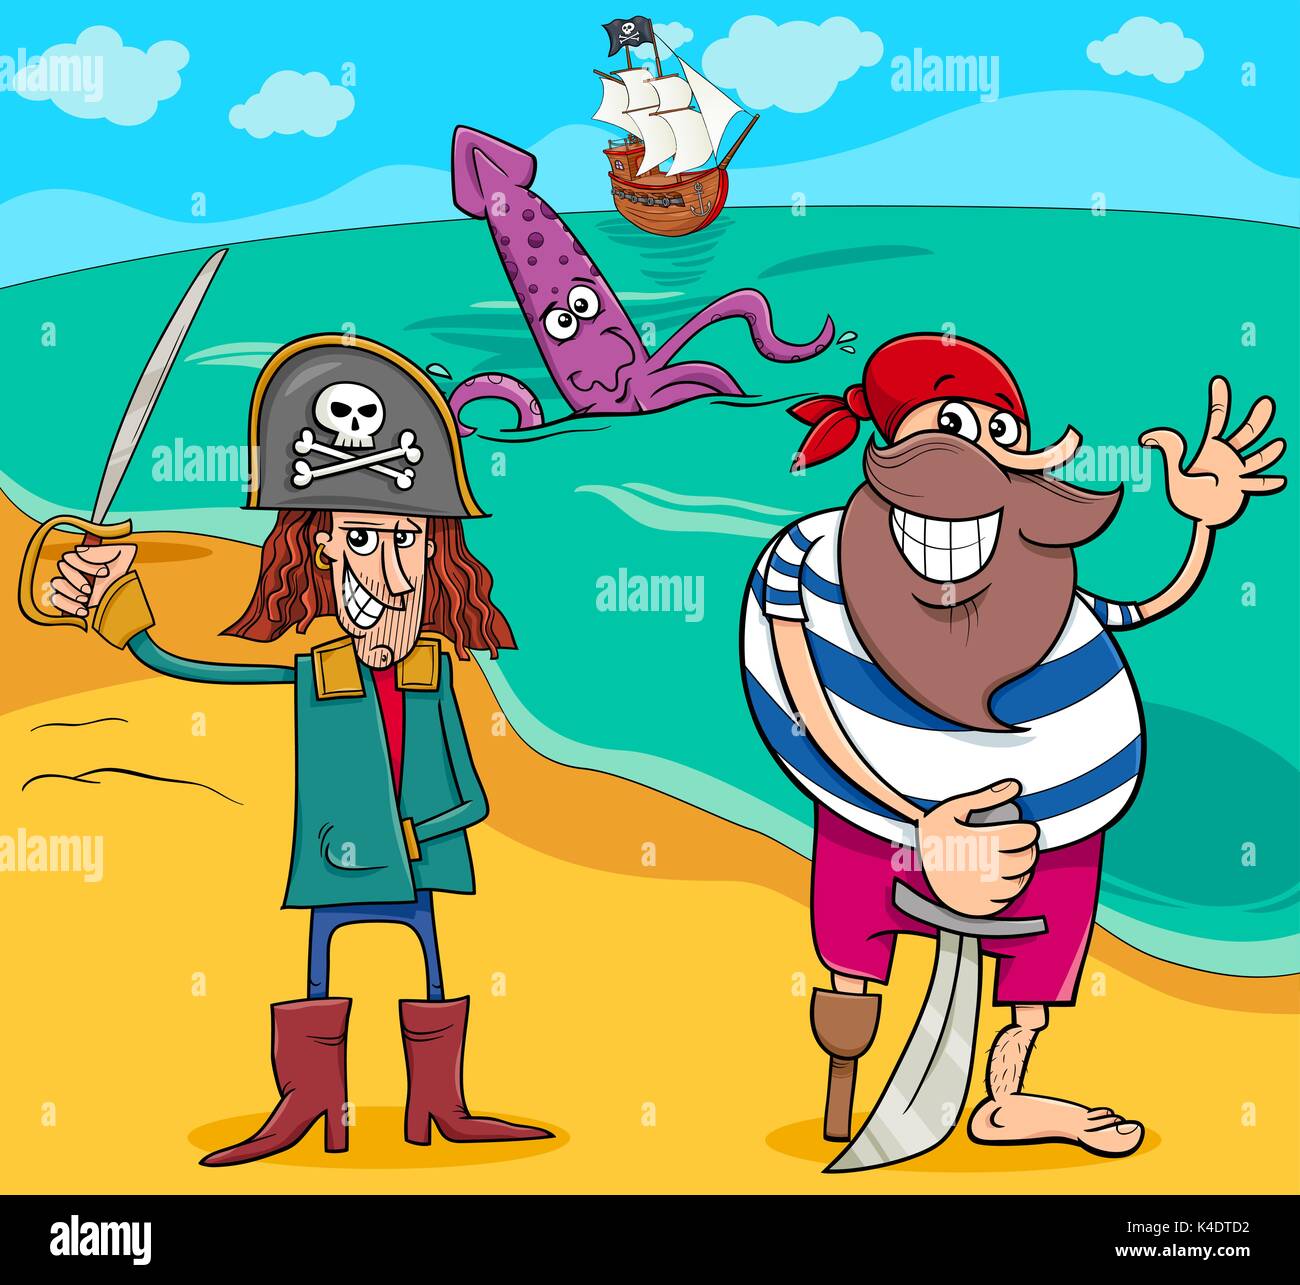 Cartoon Illustrations of Pirate Characters with Ship on Island Stock Vector